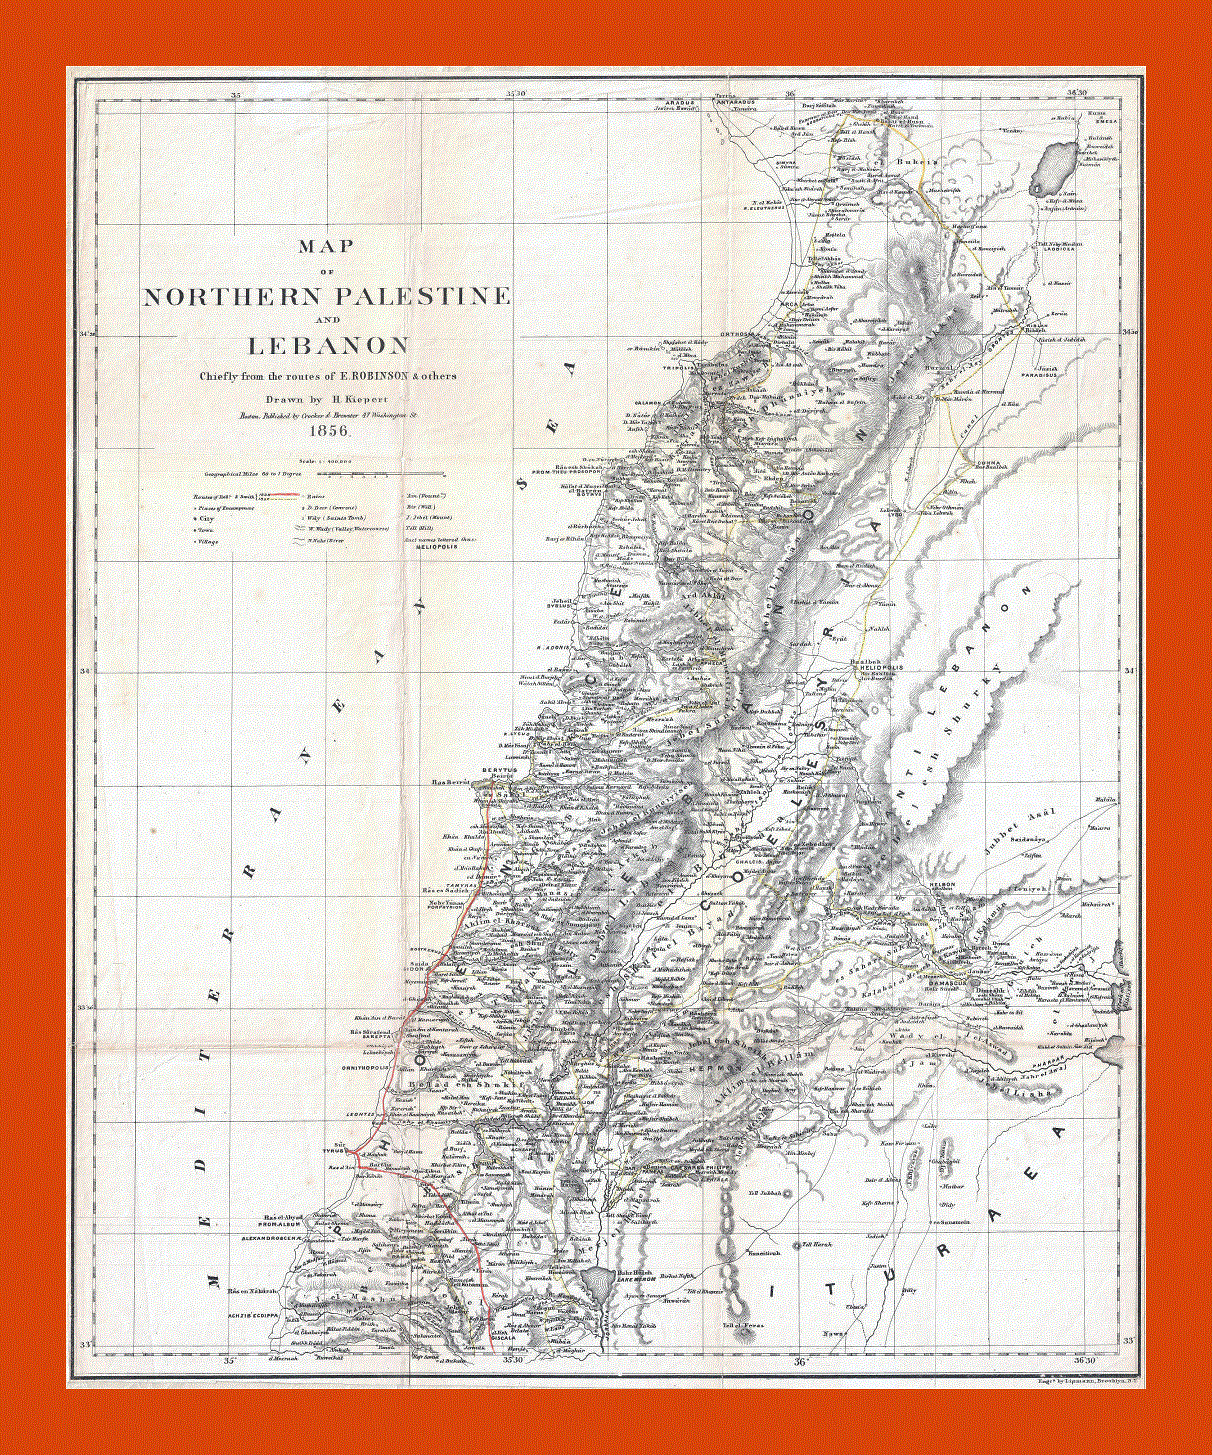 Old map of Northern Palestine and Lebanon - 1856